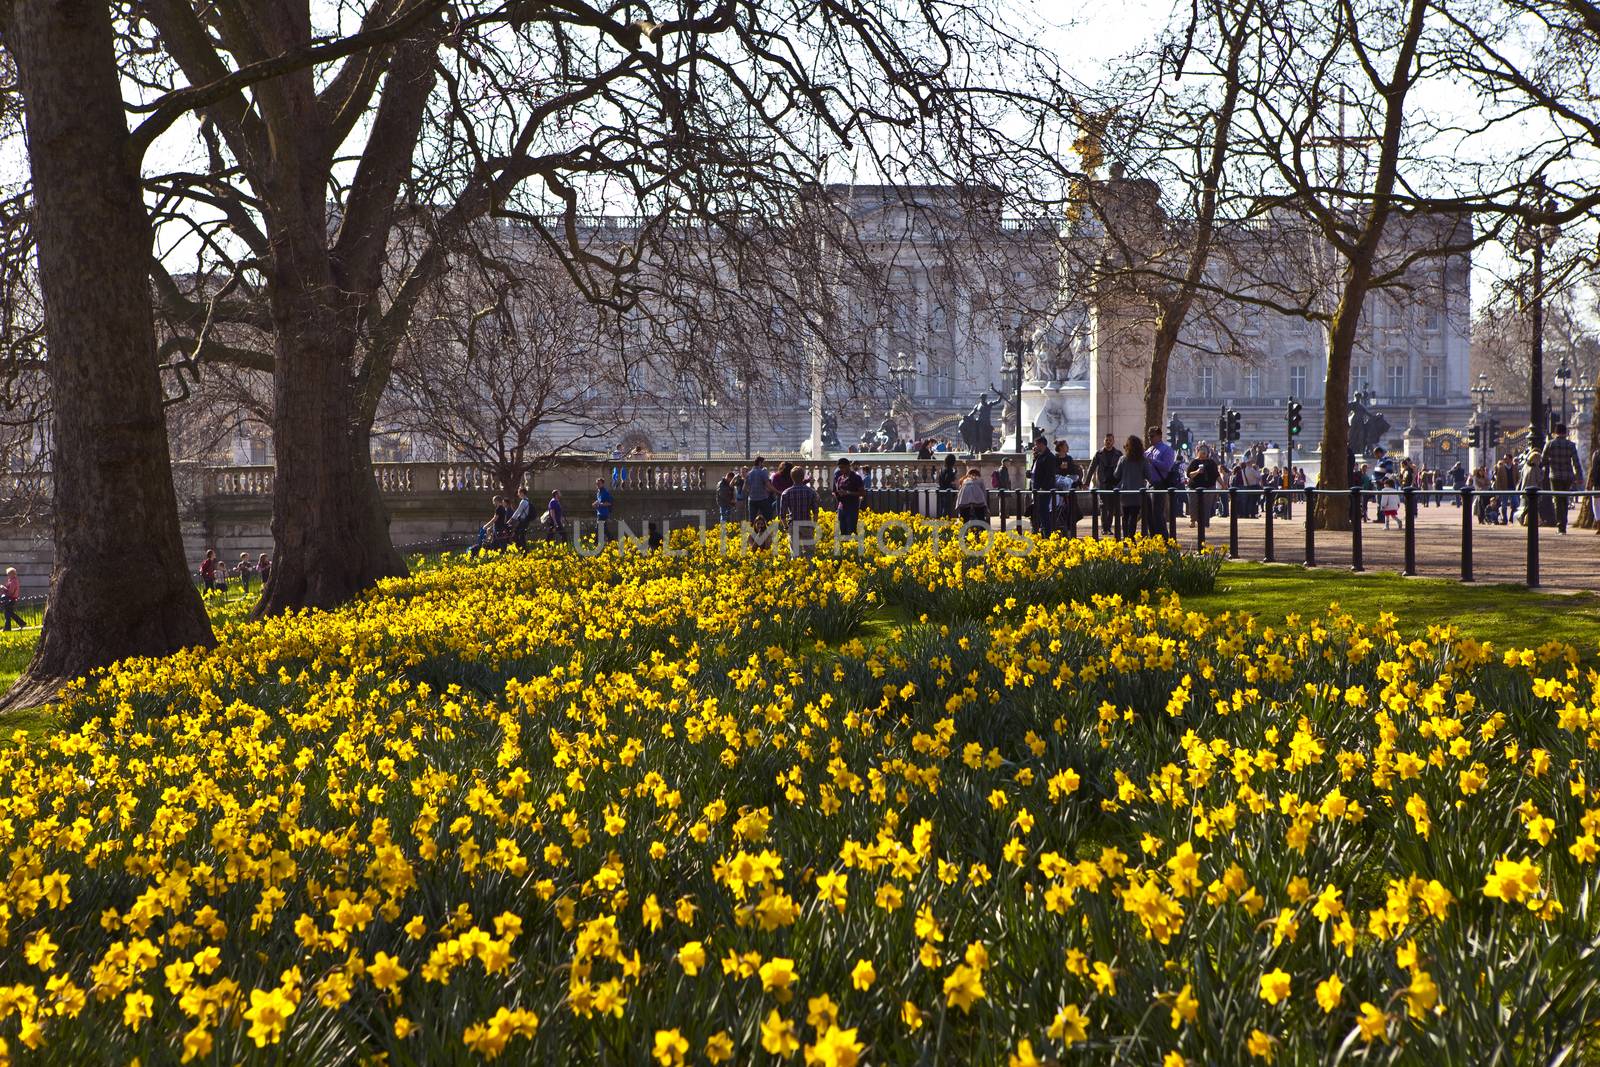 The beautiful view of Buckingham Palace from St. James's Park in Spring.